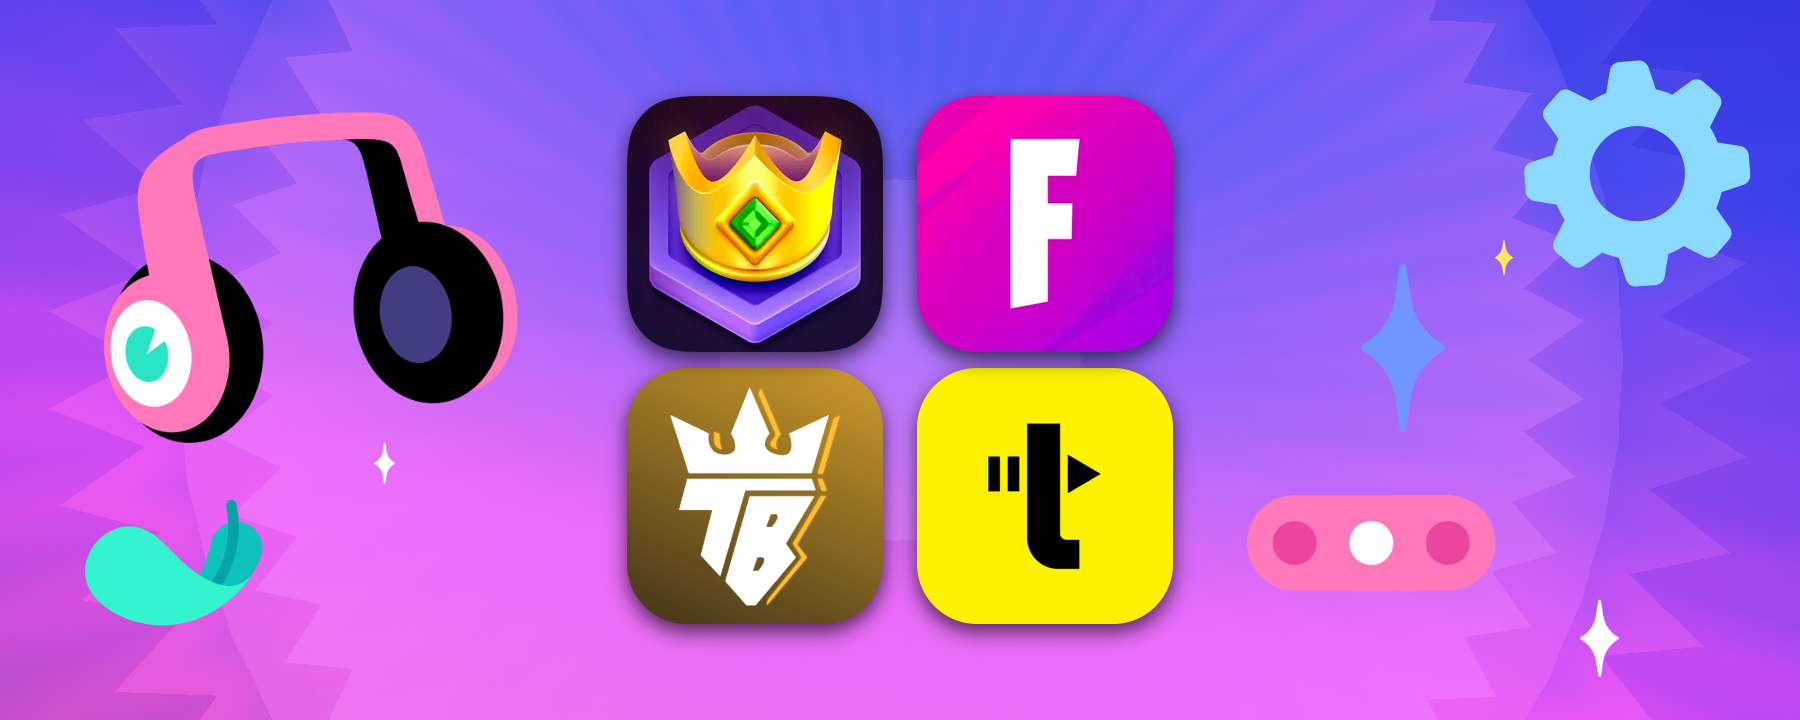 The logos for Tourney Bot, Guess the Rank, FN Leaderboard, and TREBEL.